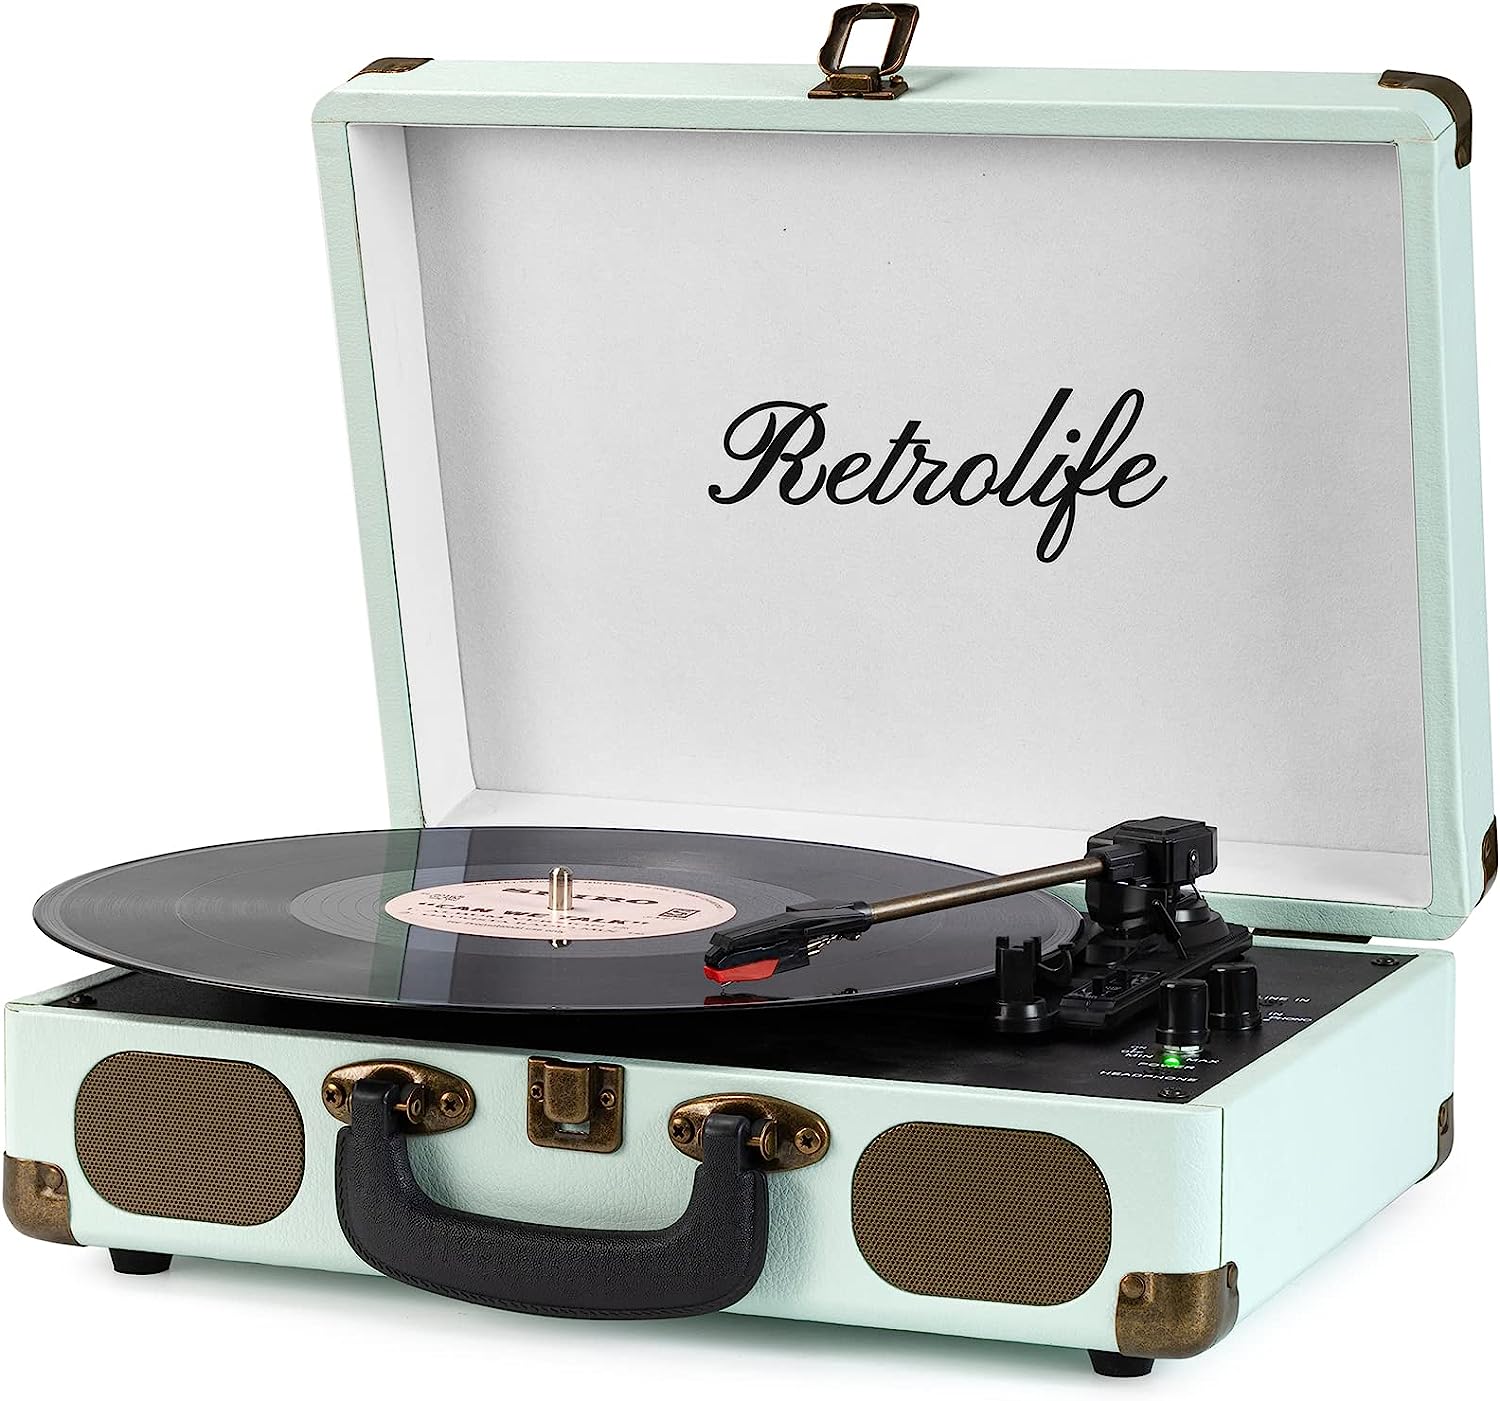 Vinyl Record Player 3-Speed Bluetooth Suitcase Portable Belt-Driven Report Player with Built-in Speakers RCA Line Out AUX in Headphone Jack Vintage Turntable